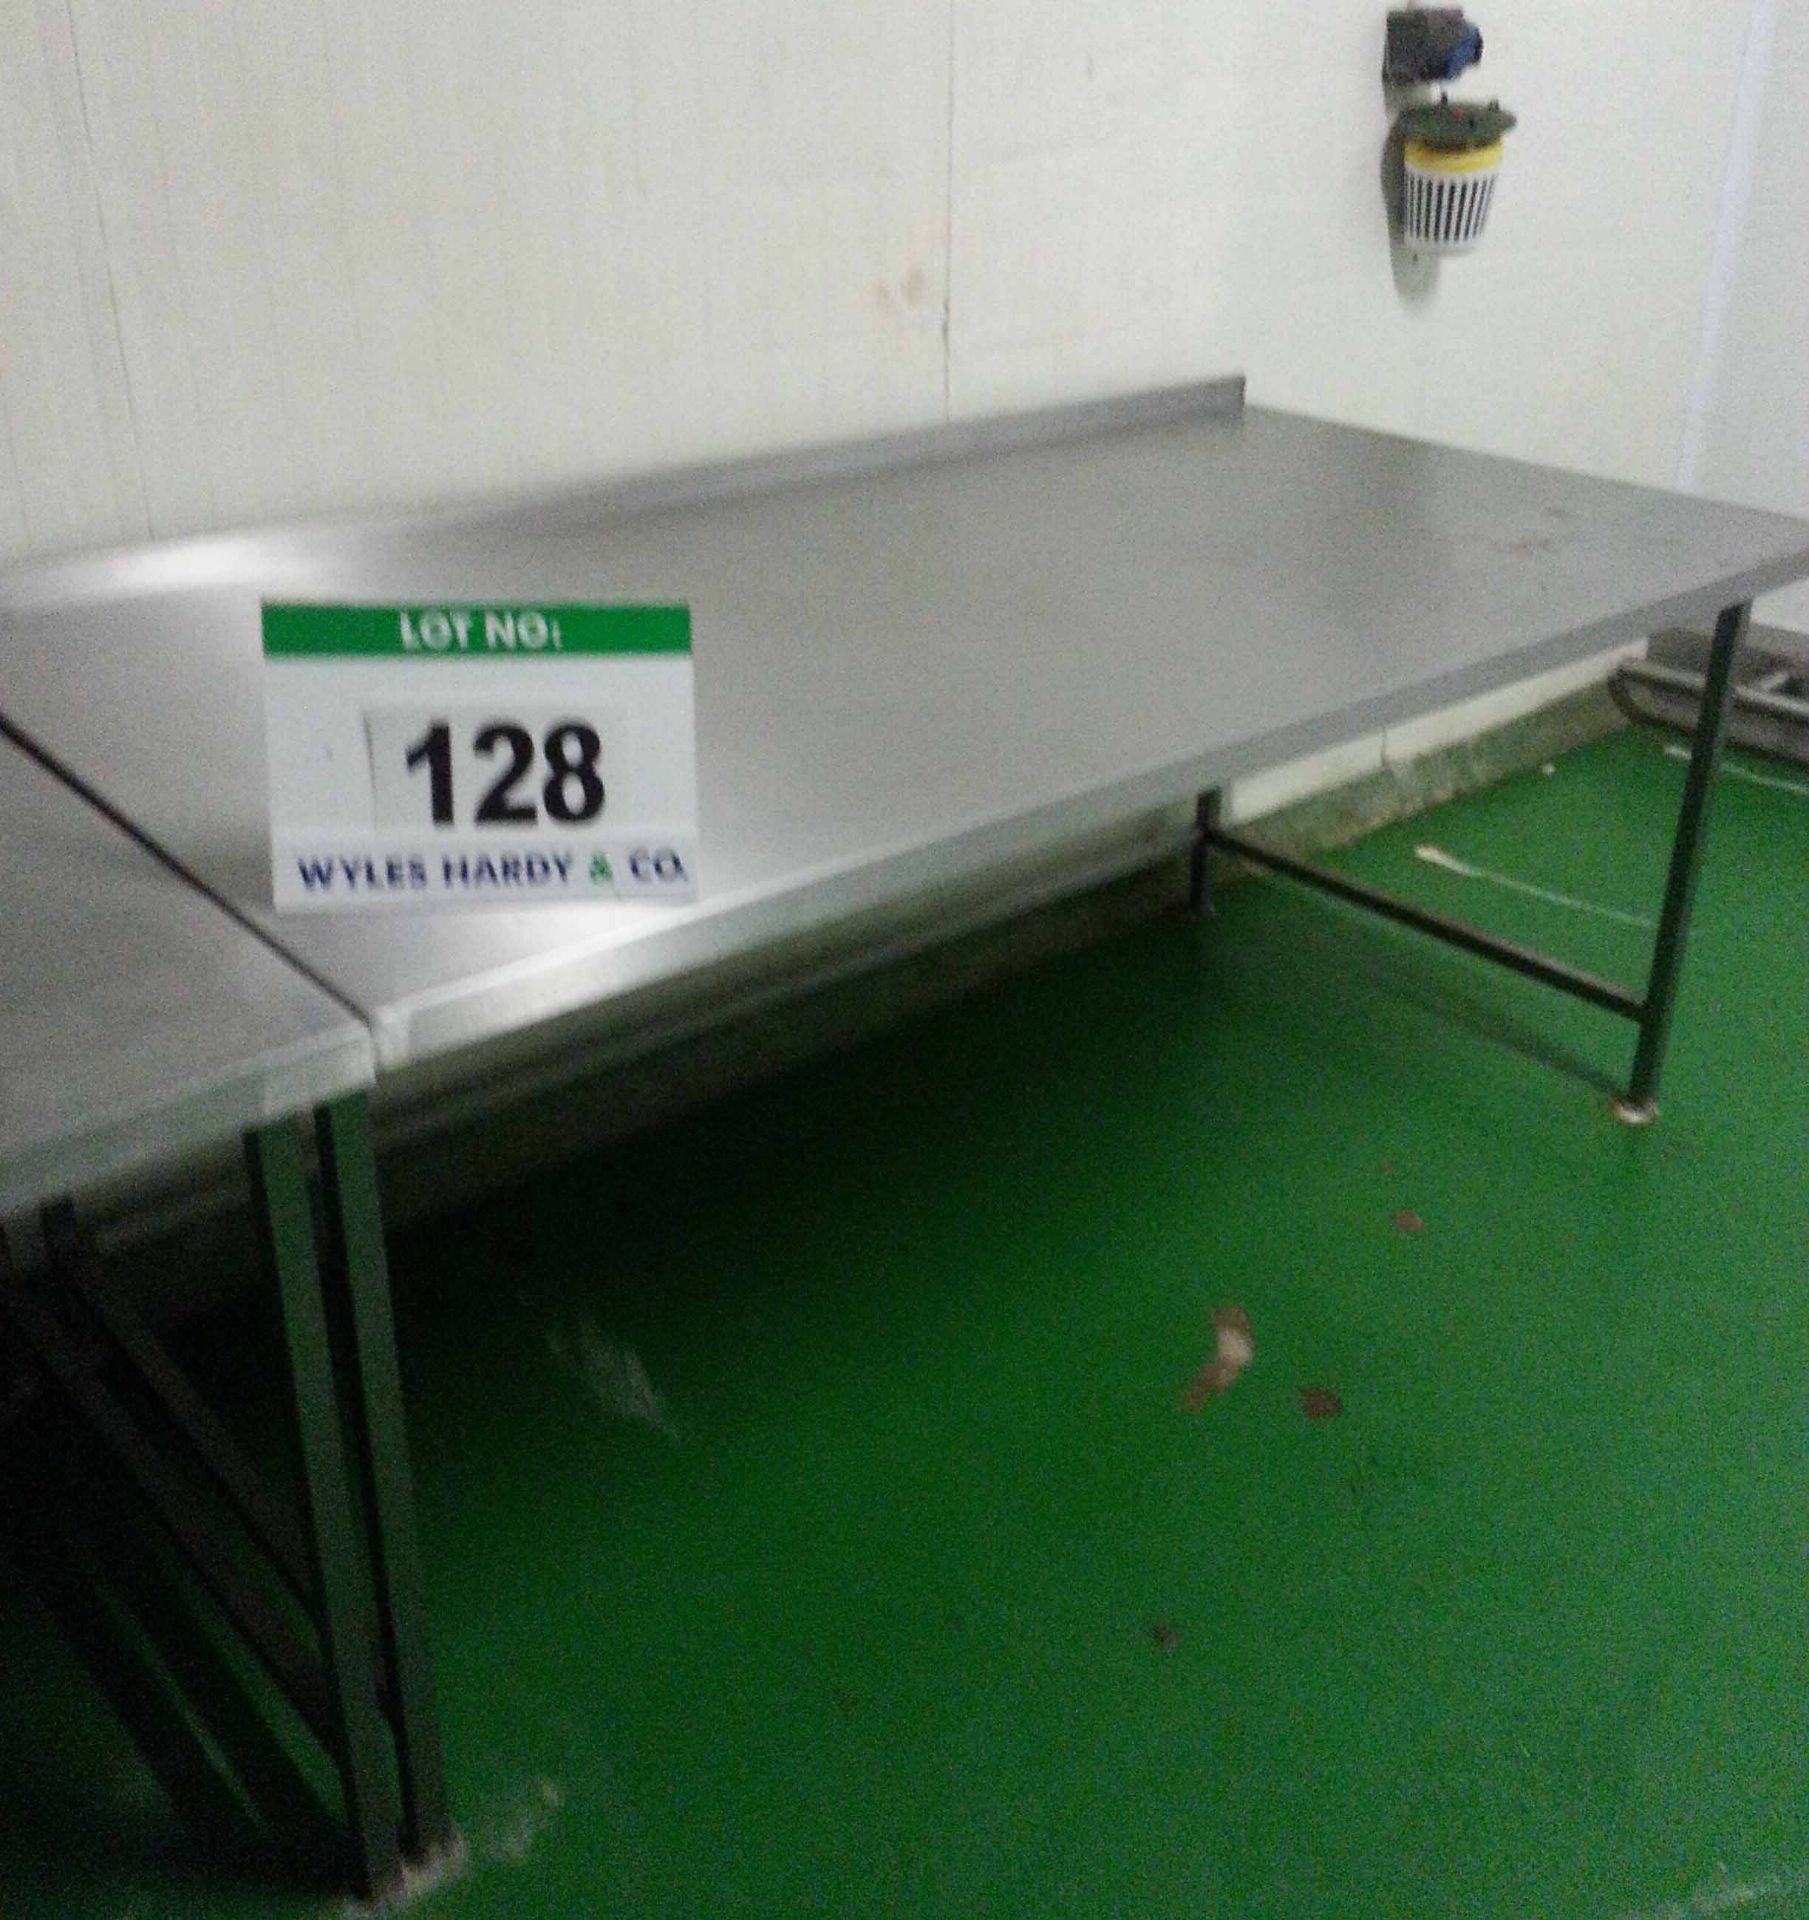 An Approx. 2000mm x 1000mm x 900mm Height Stainless Steel Food Preparation Table